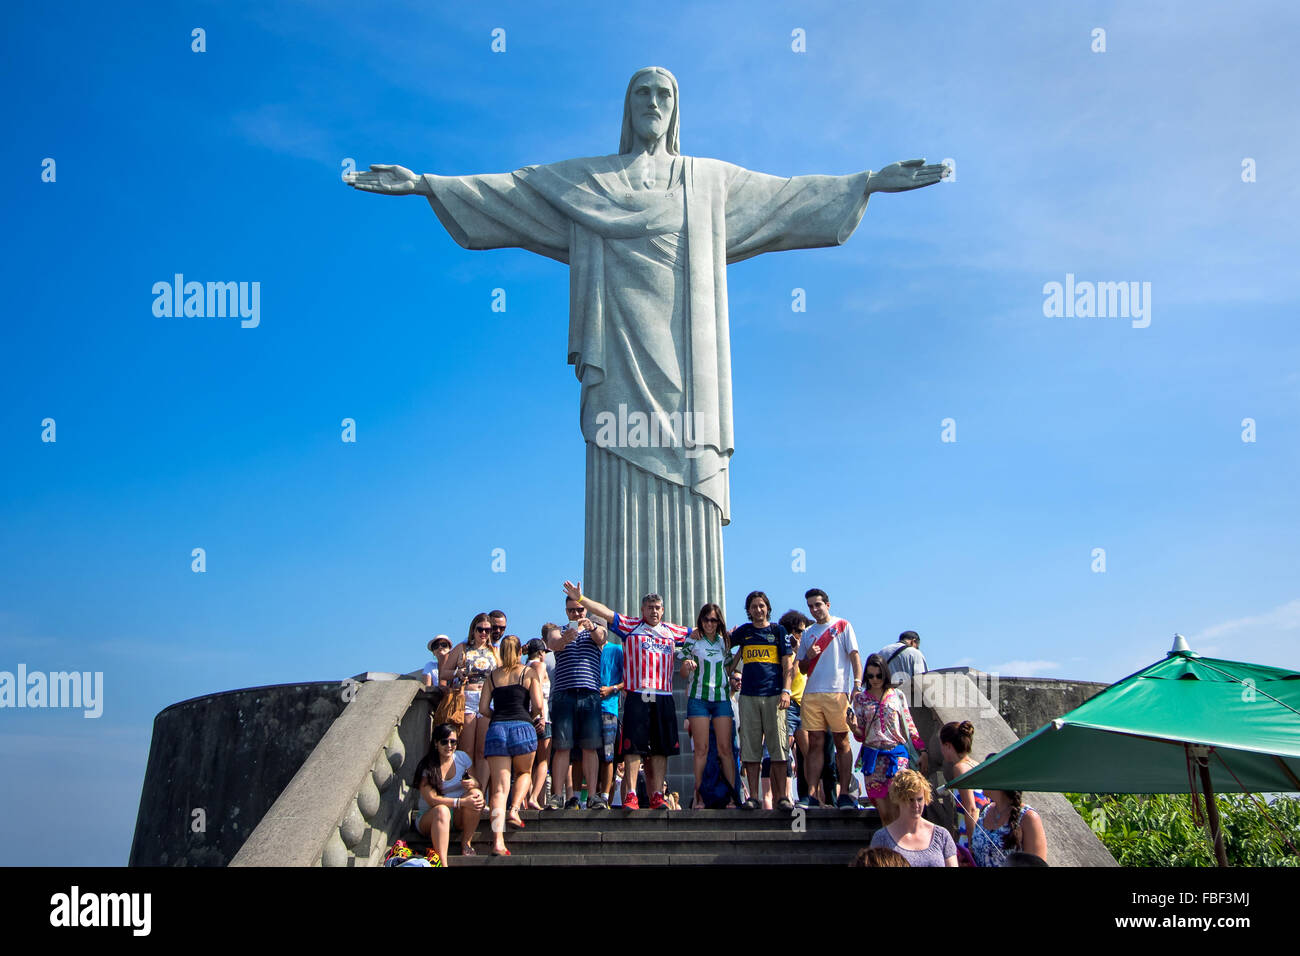 Tourists posing in front of famous Christ the Redeemer statue atop the Corcovado mountain in Rio de Janeiro, Brazil. Stock Photo